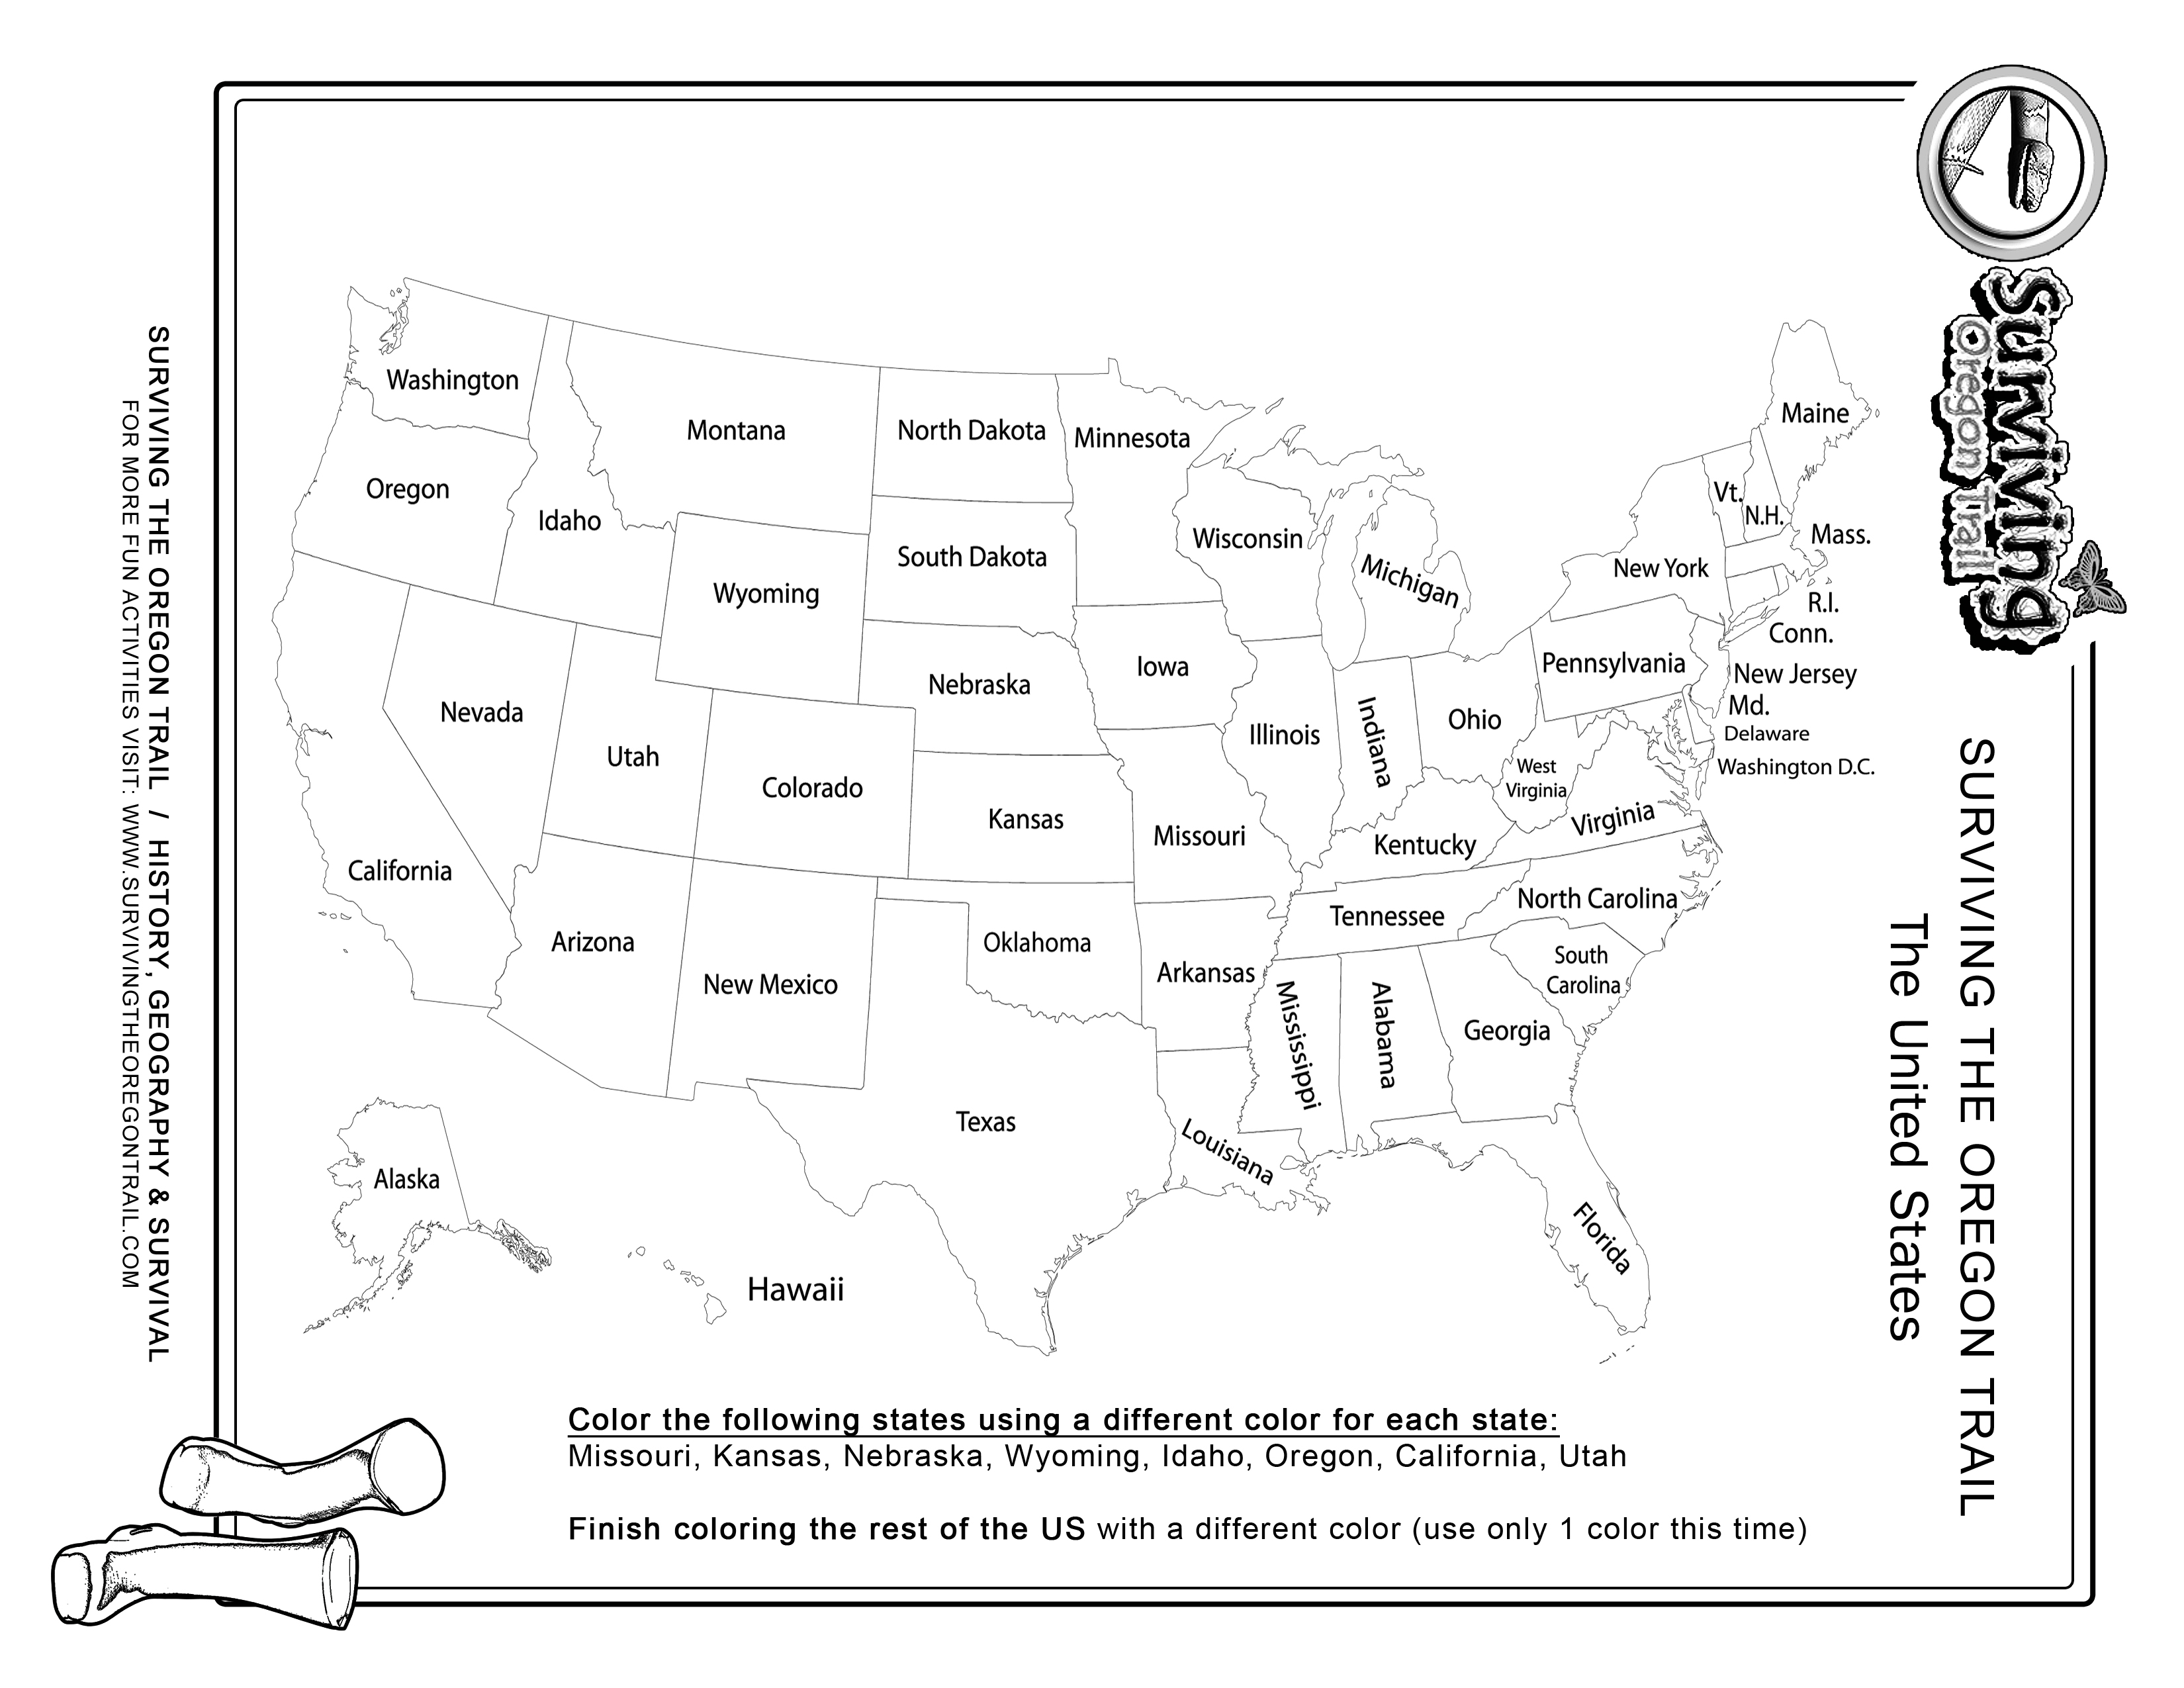 US Coloring Page – Color the following states